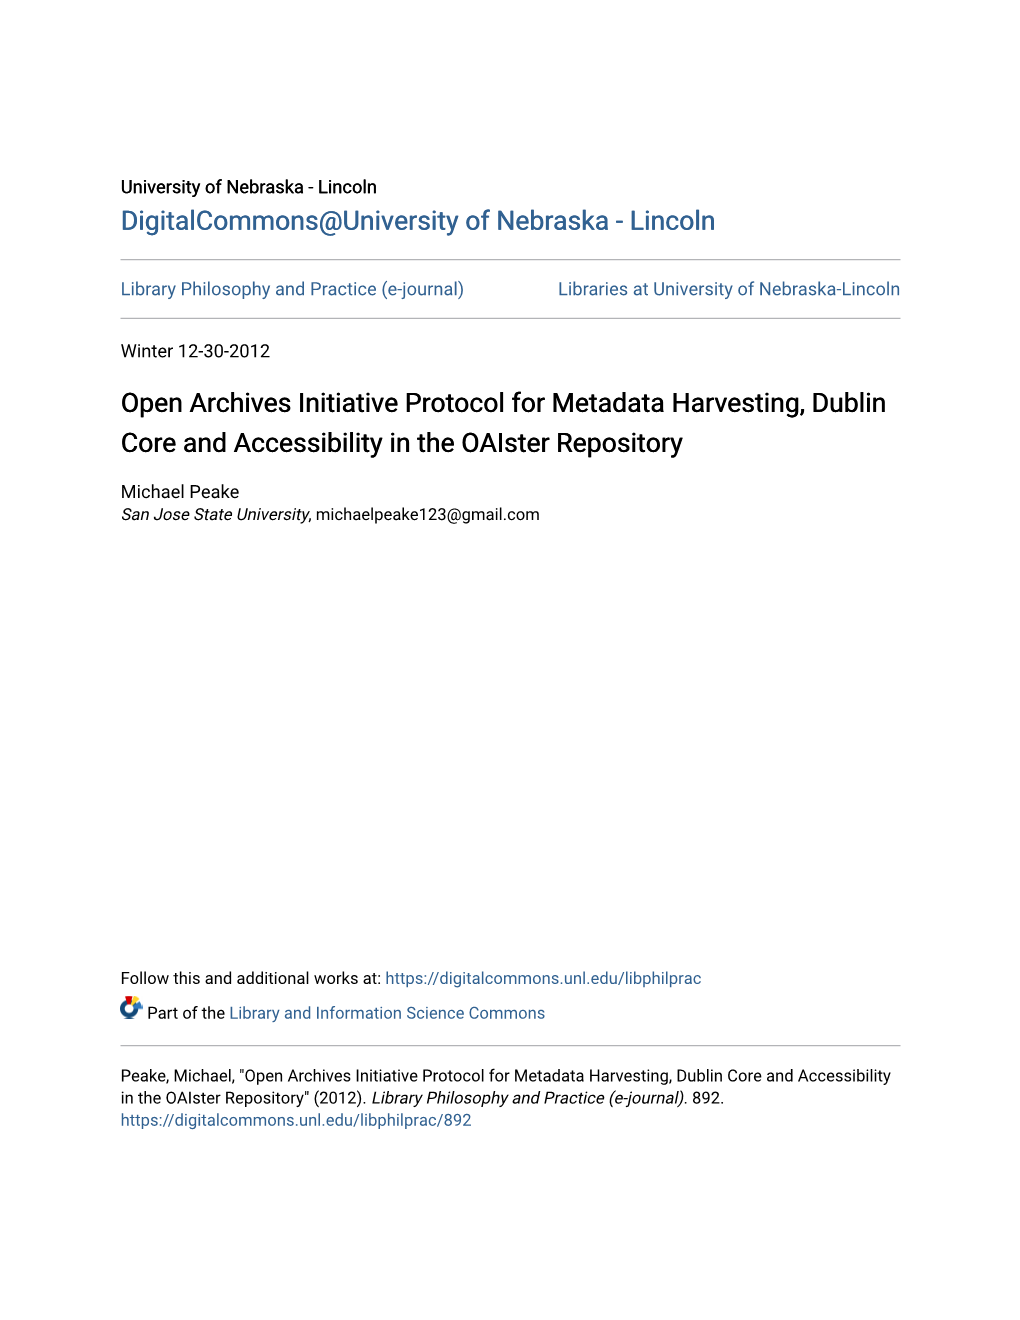 Open Archives Initiative Protocol for Metadata Harvesting, Dublin Core and Accessibility in the Oaister Repository